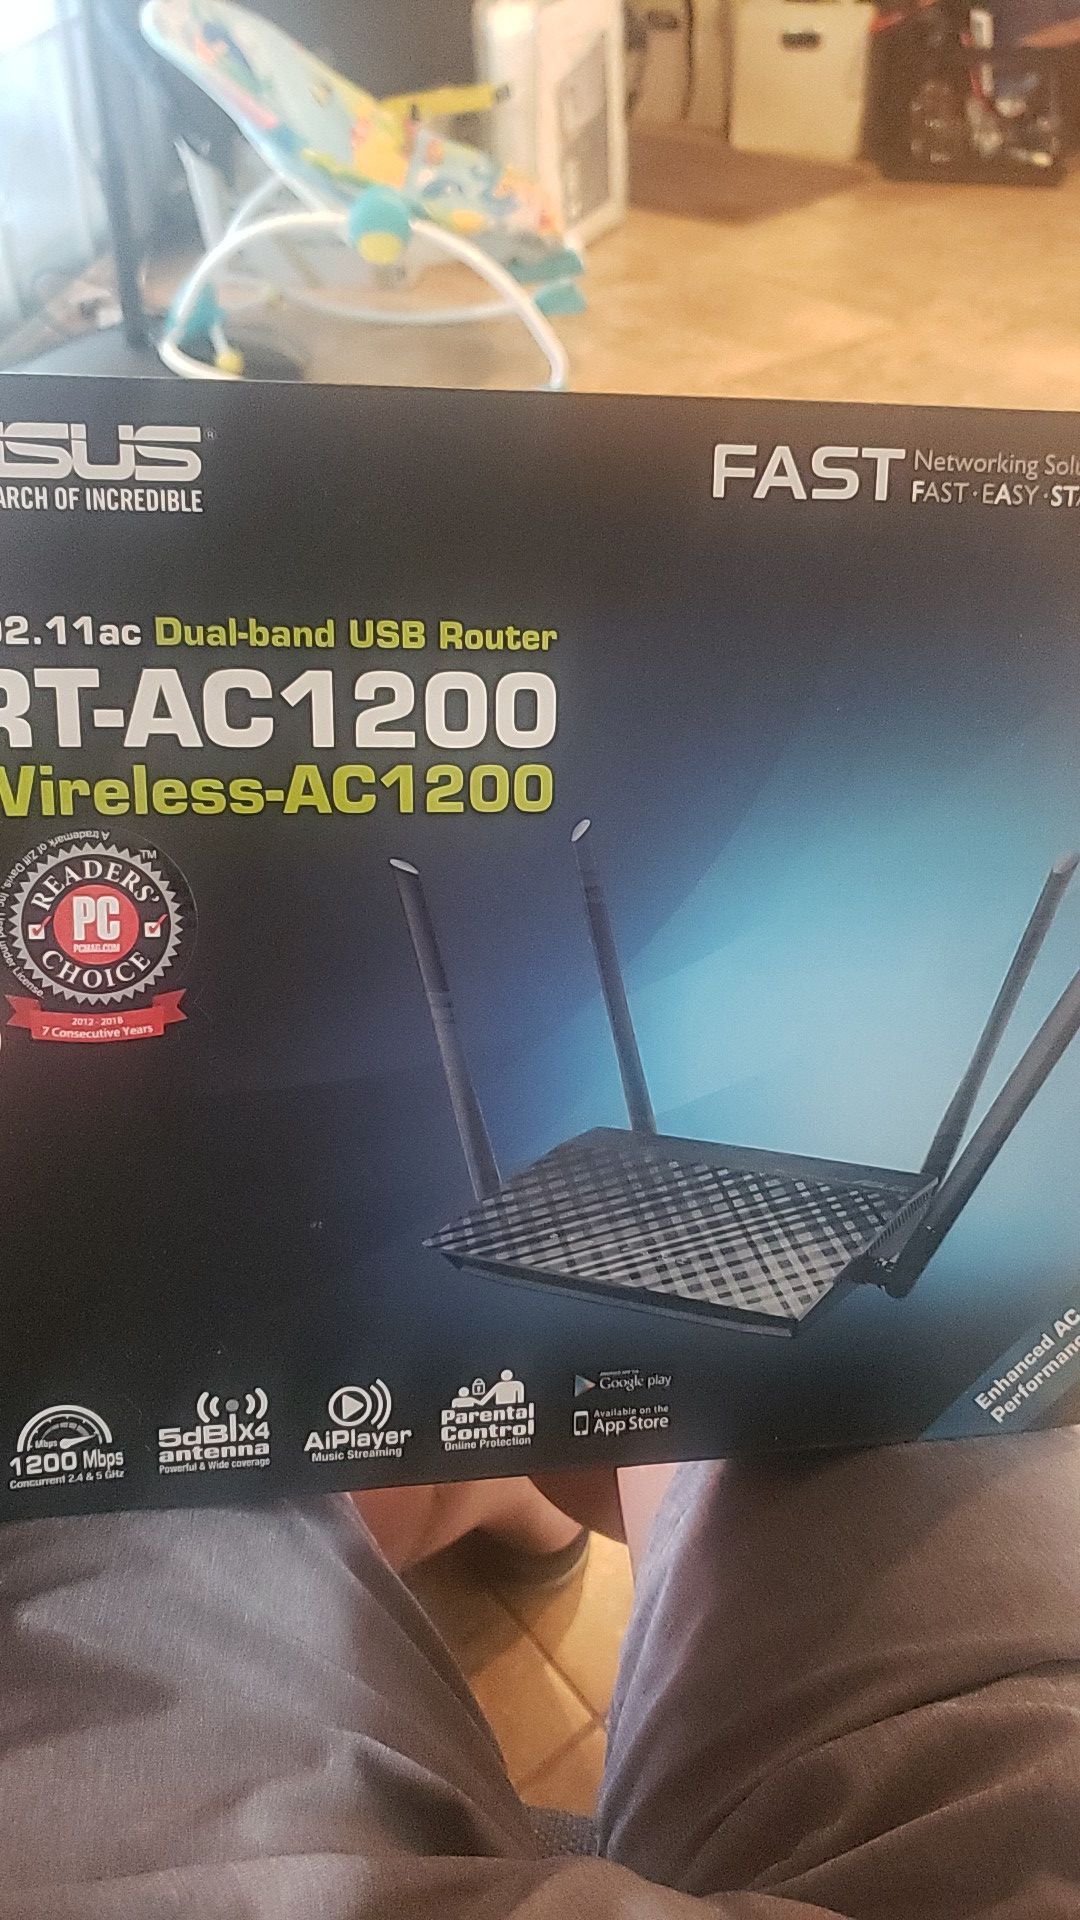 Router or access point. Asus still works no issue